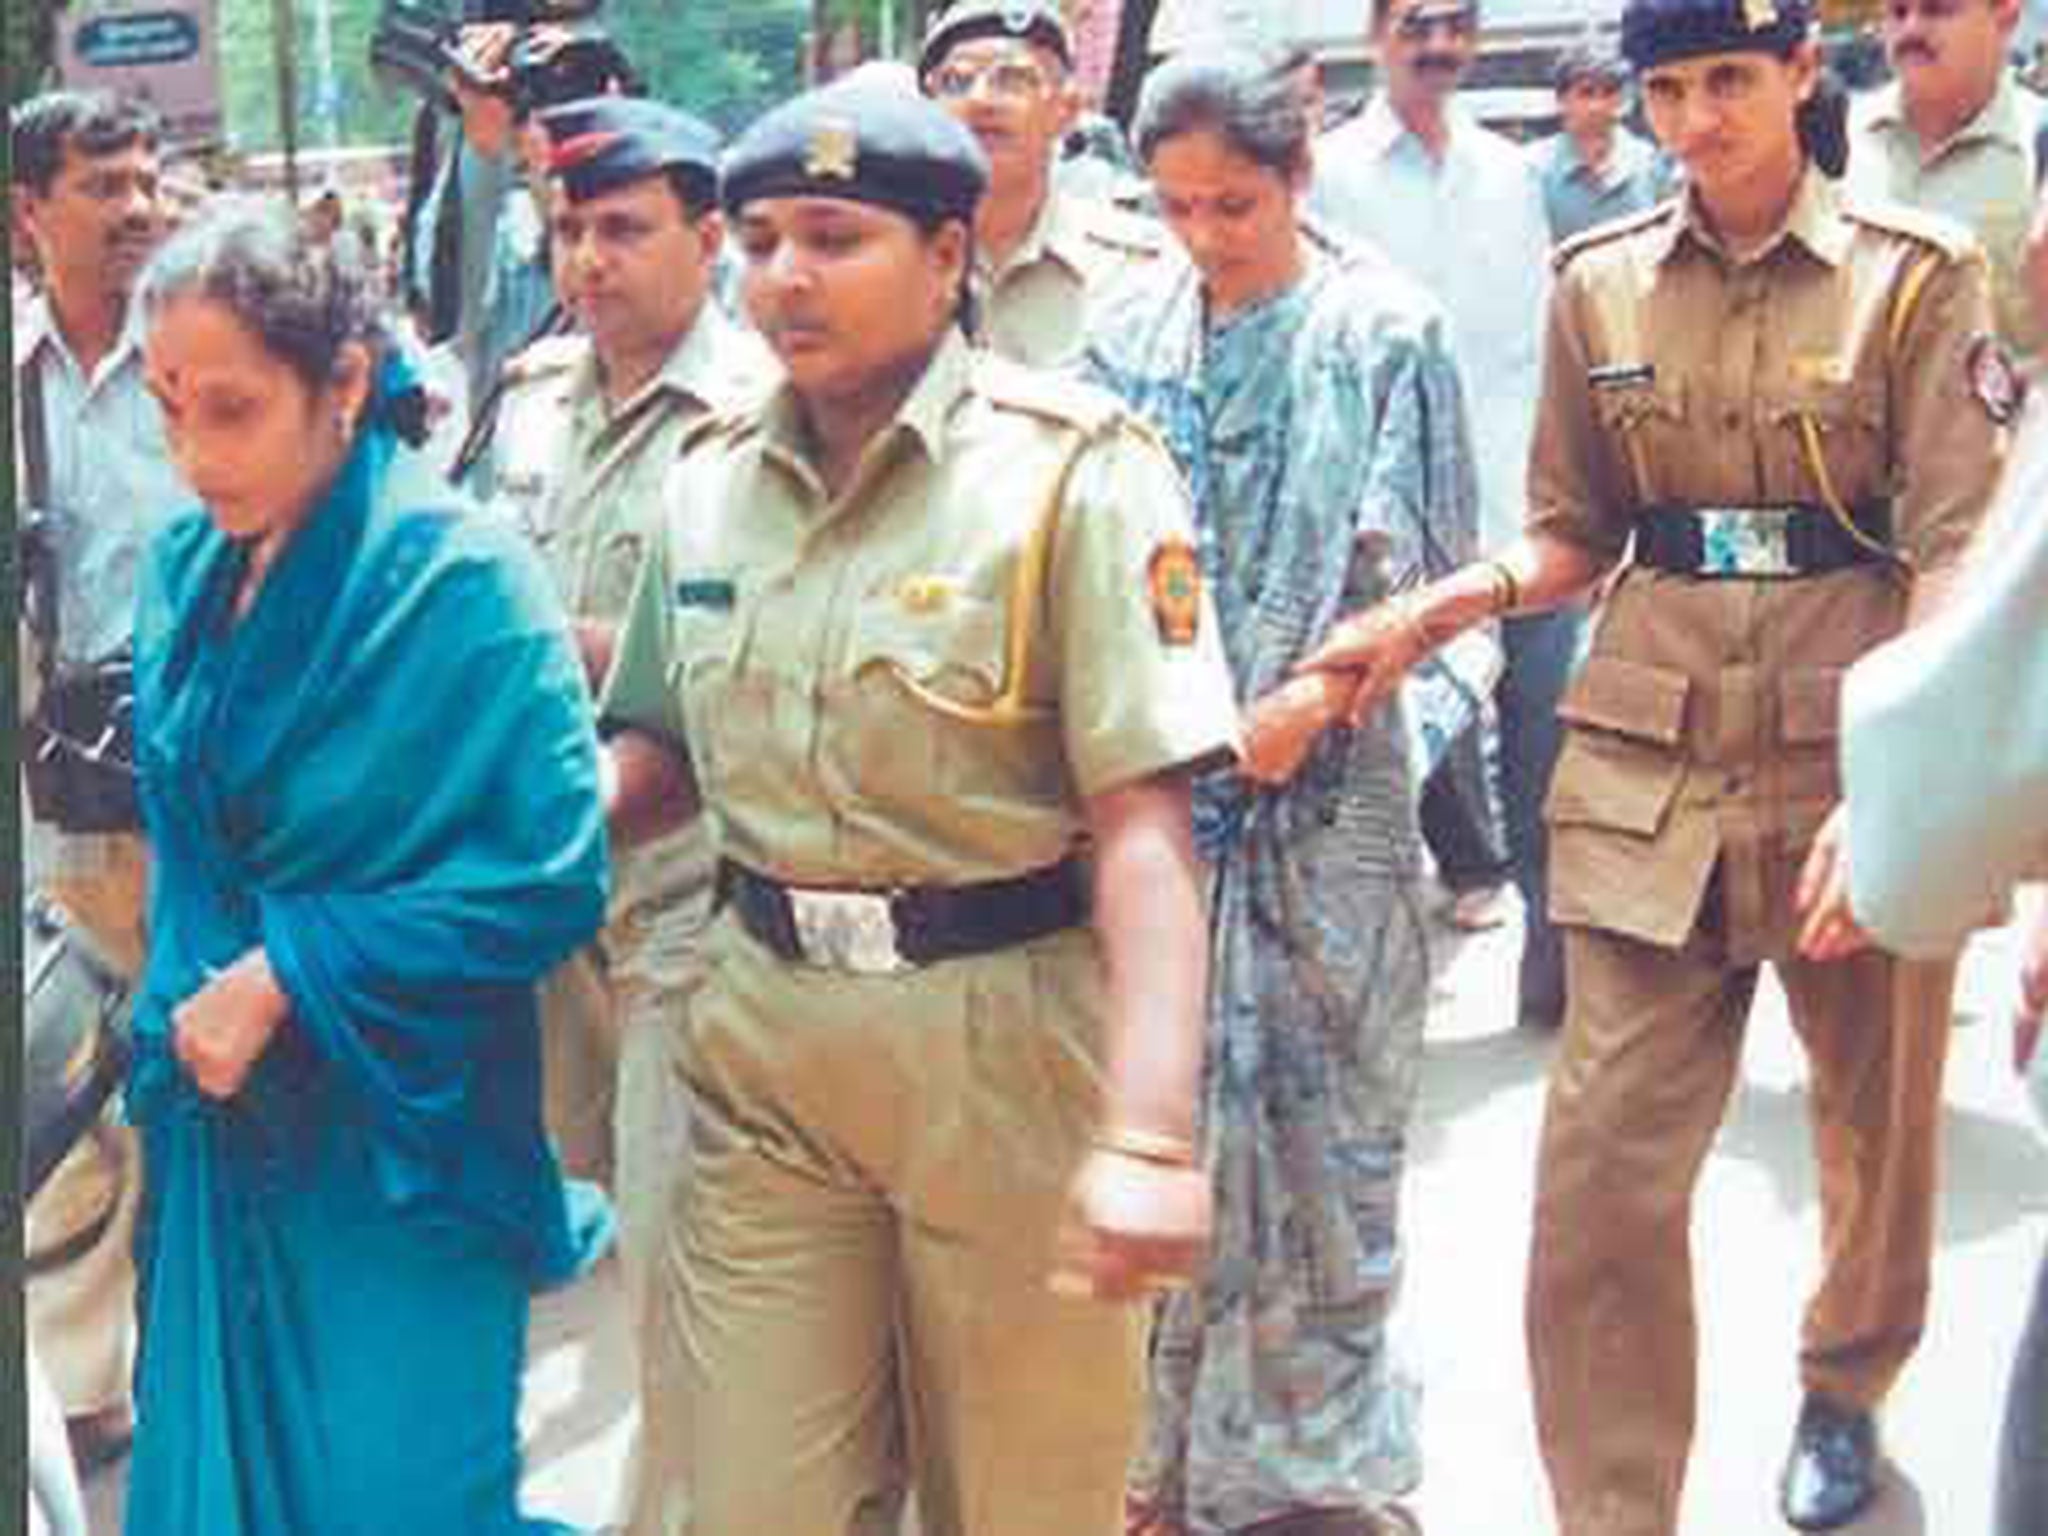 Renuka Shinde and Seema Gavit were convicted in 2001. They were first held in 1996 with their mother, who died